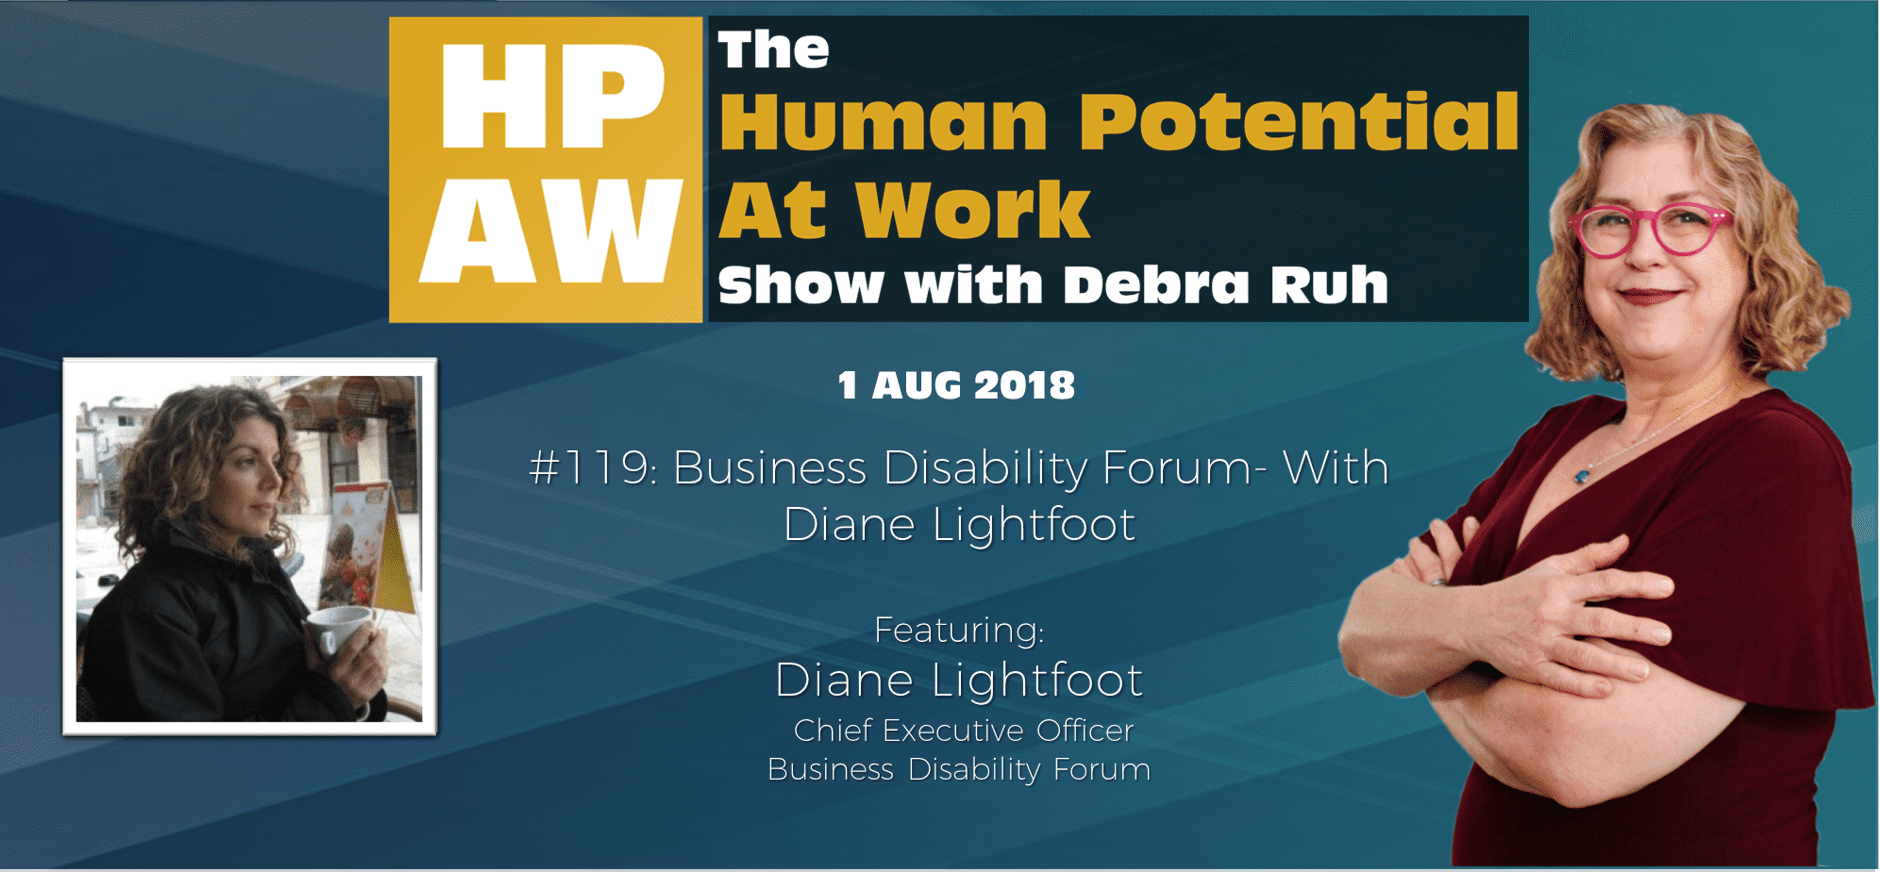 Episode Flyer for #119 Business Disability Forum- With Diane Lightfoo